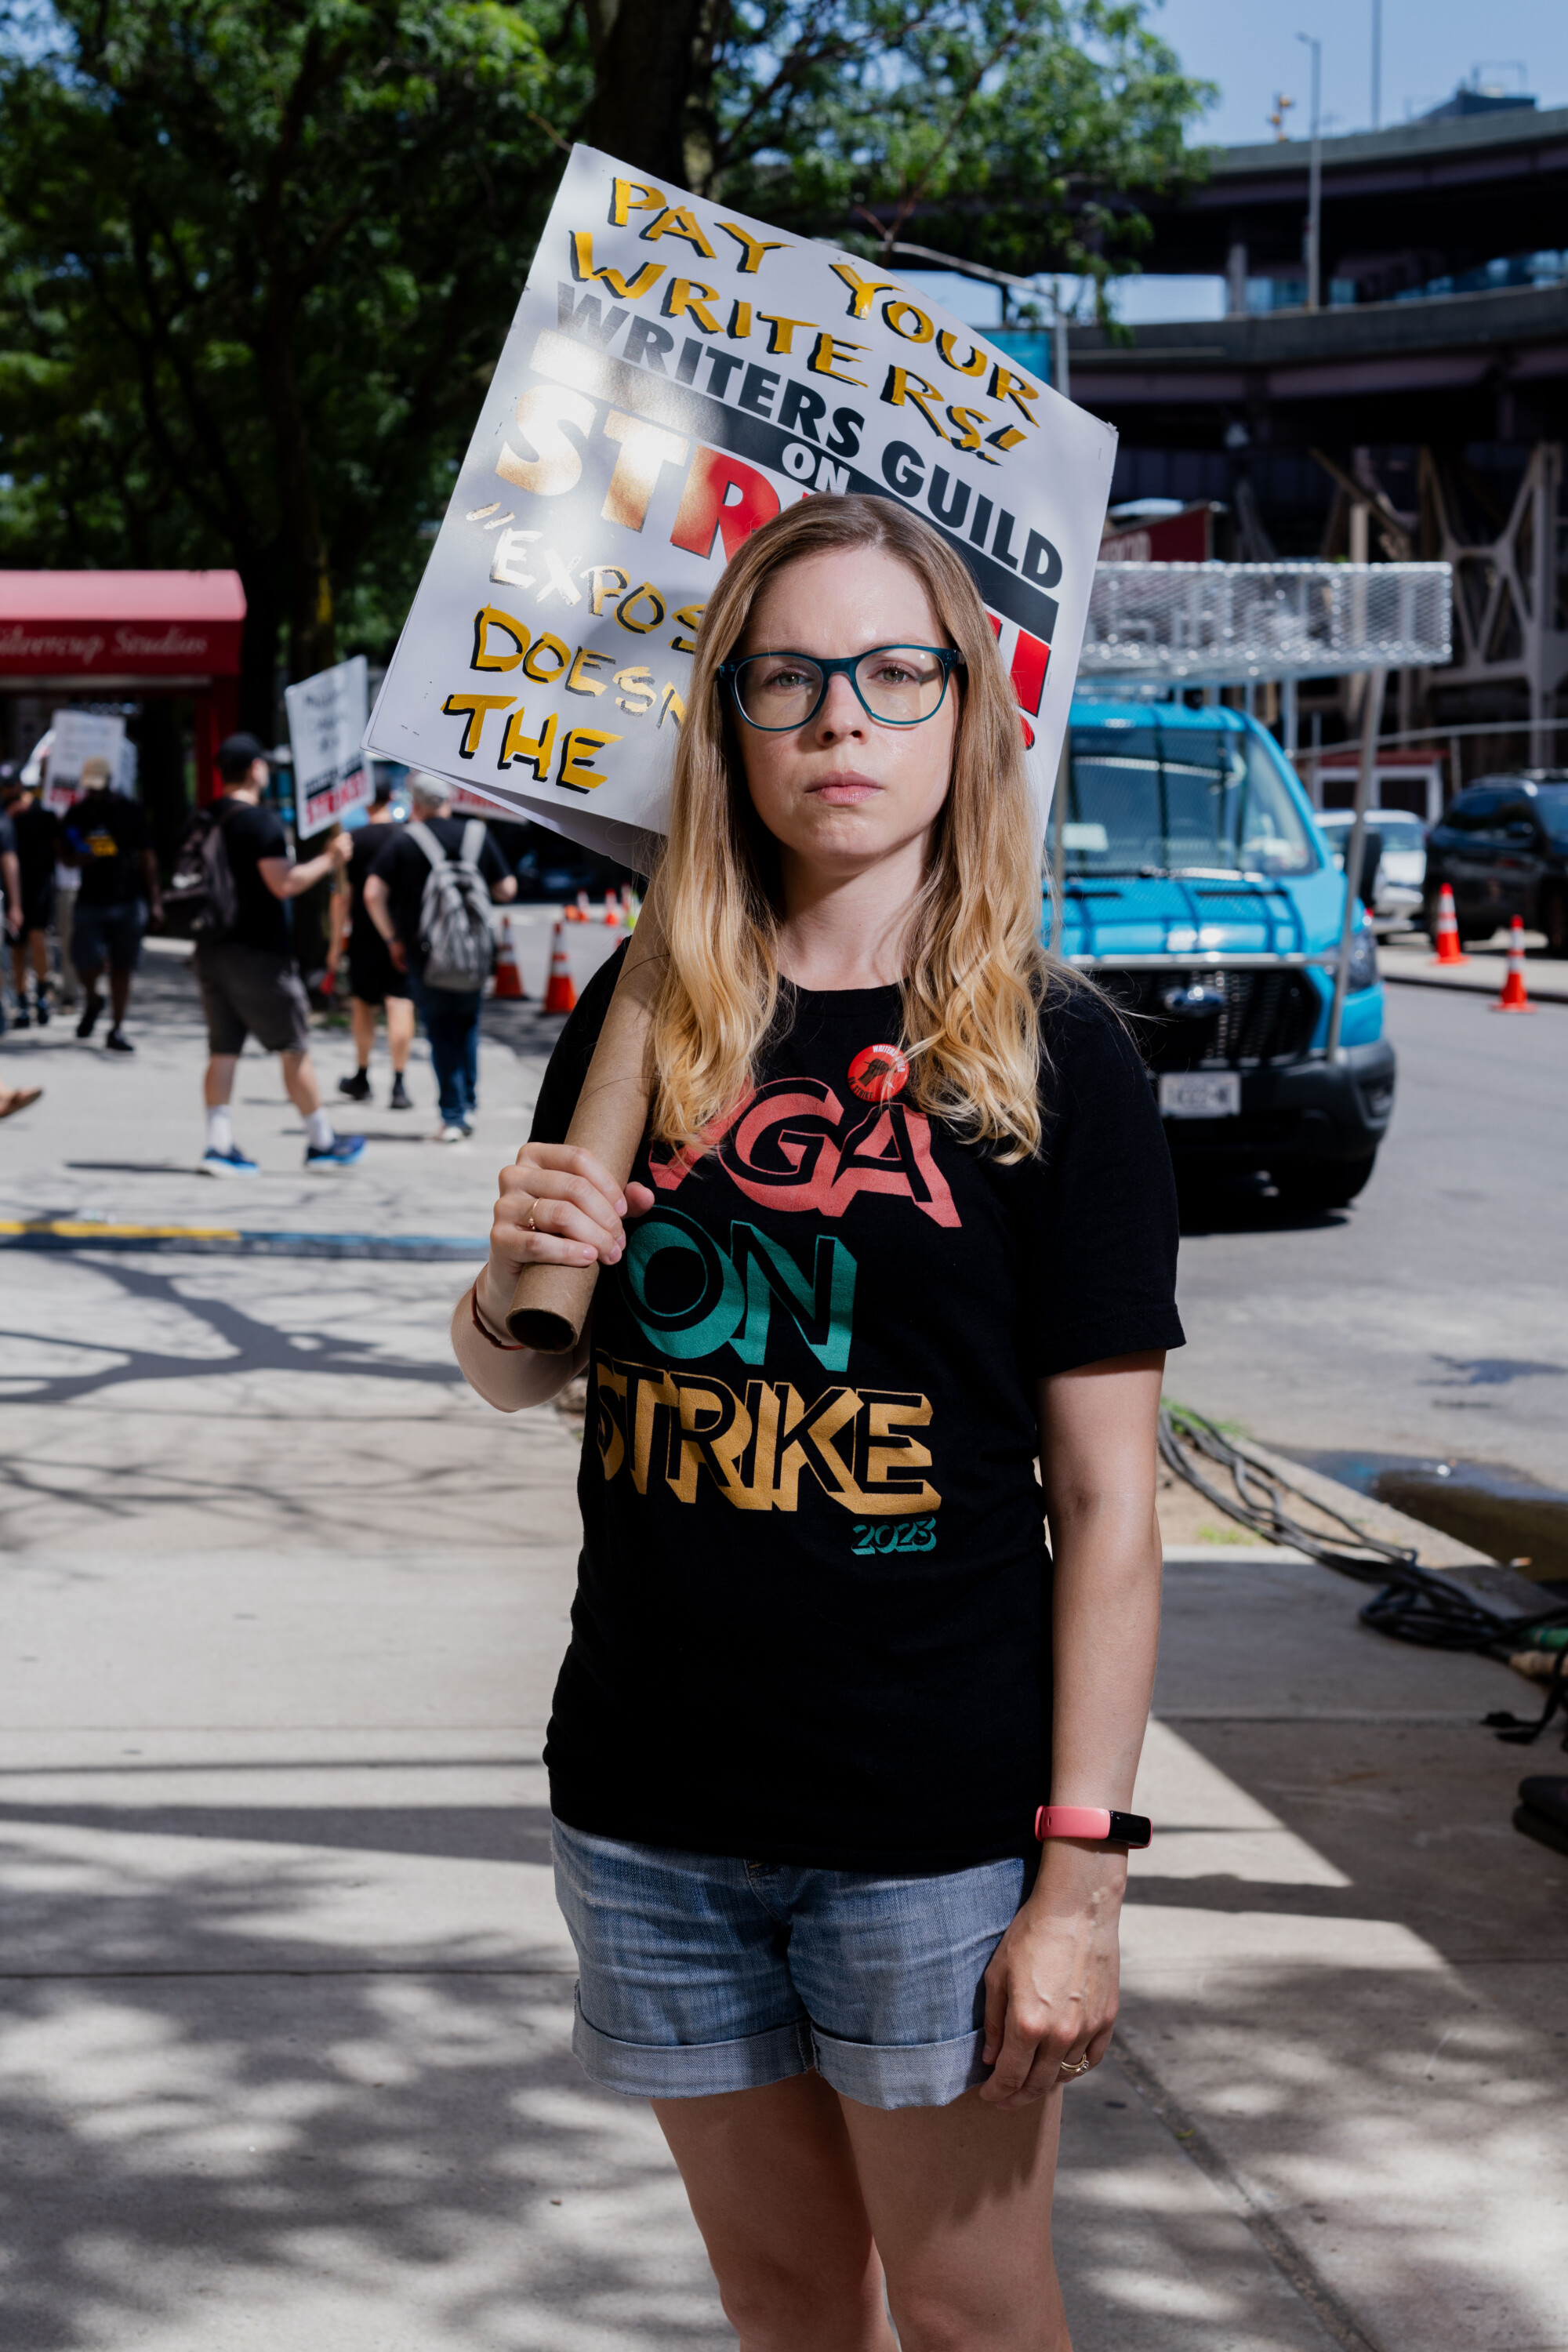 Portrait of Sasha Stewart, one of the WGA strikers in front of Silvercup Studios